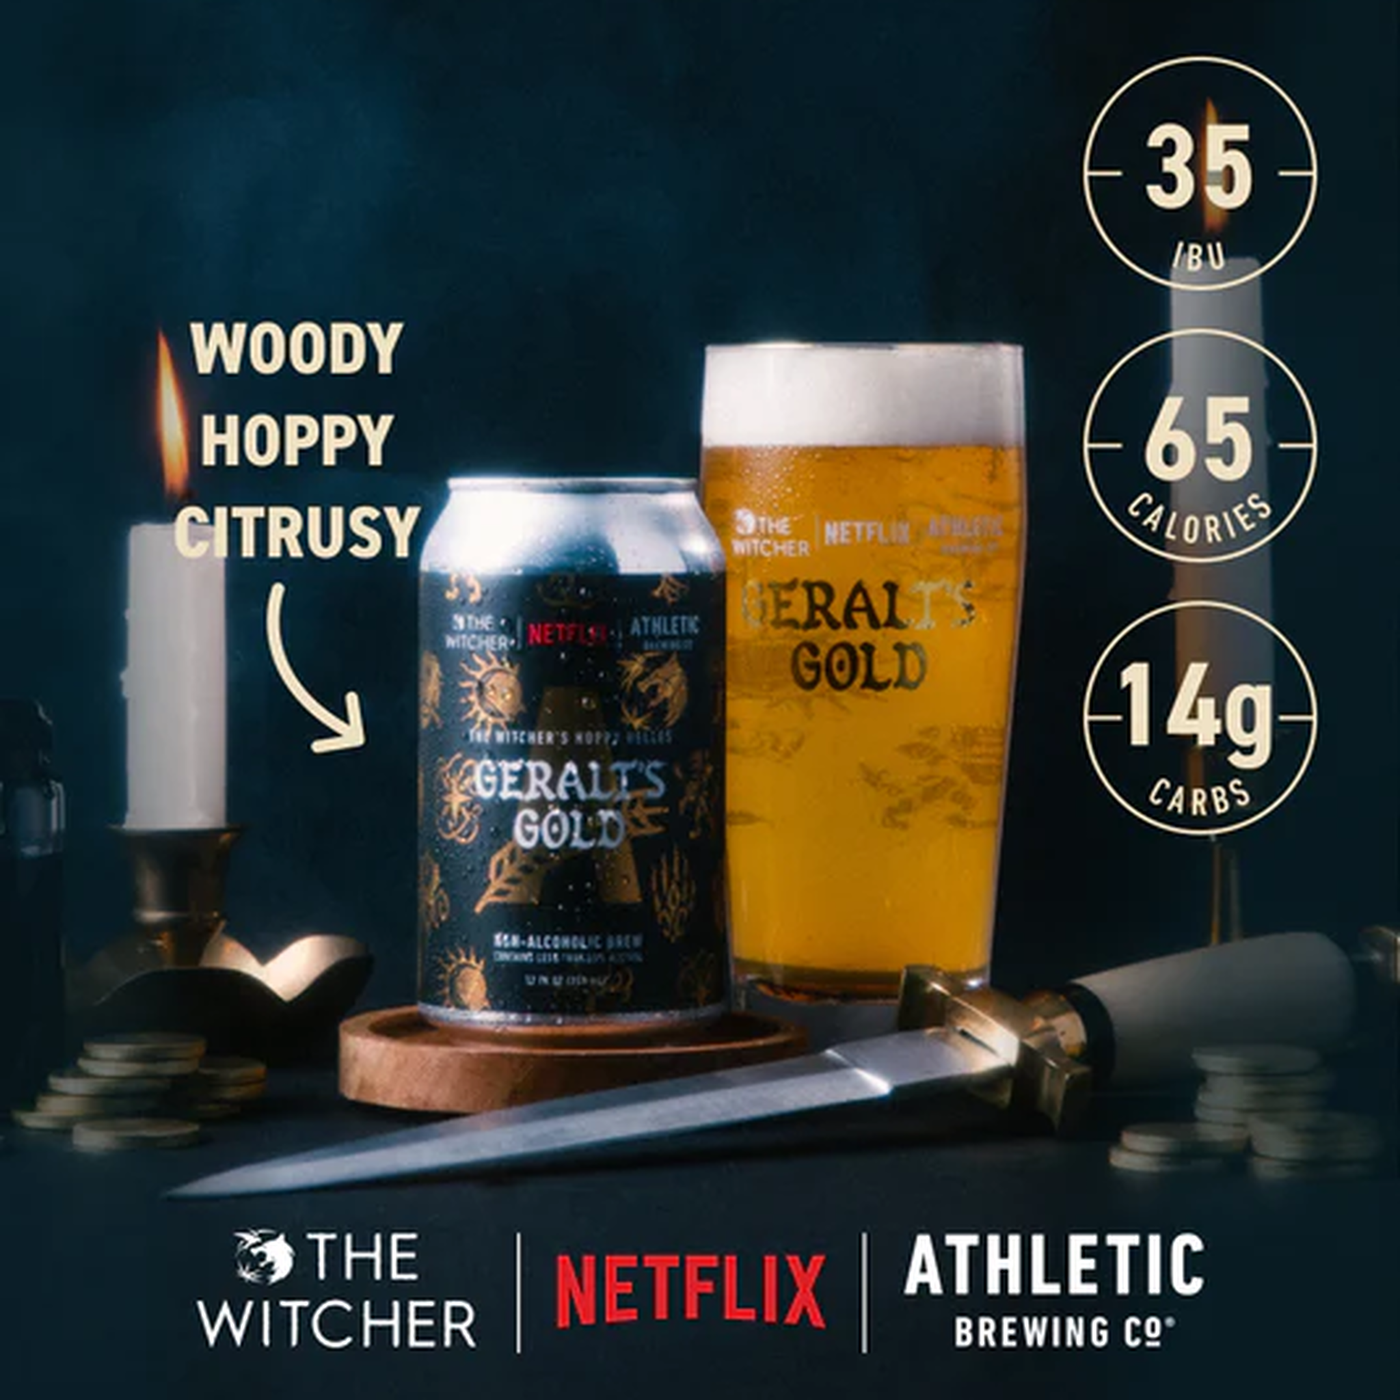 Athletic Brewing - Geralt’s Gold The Witcher’s Hoppy Helles